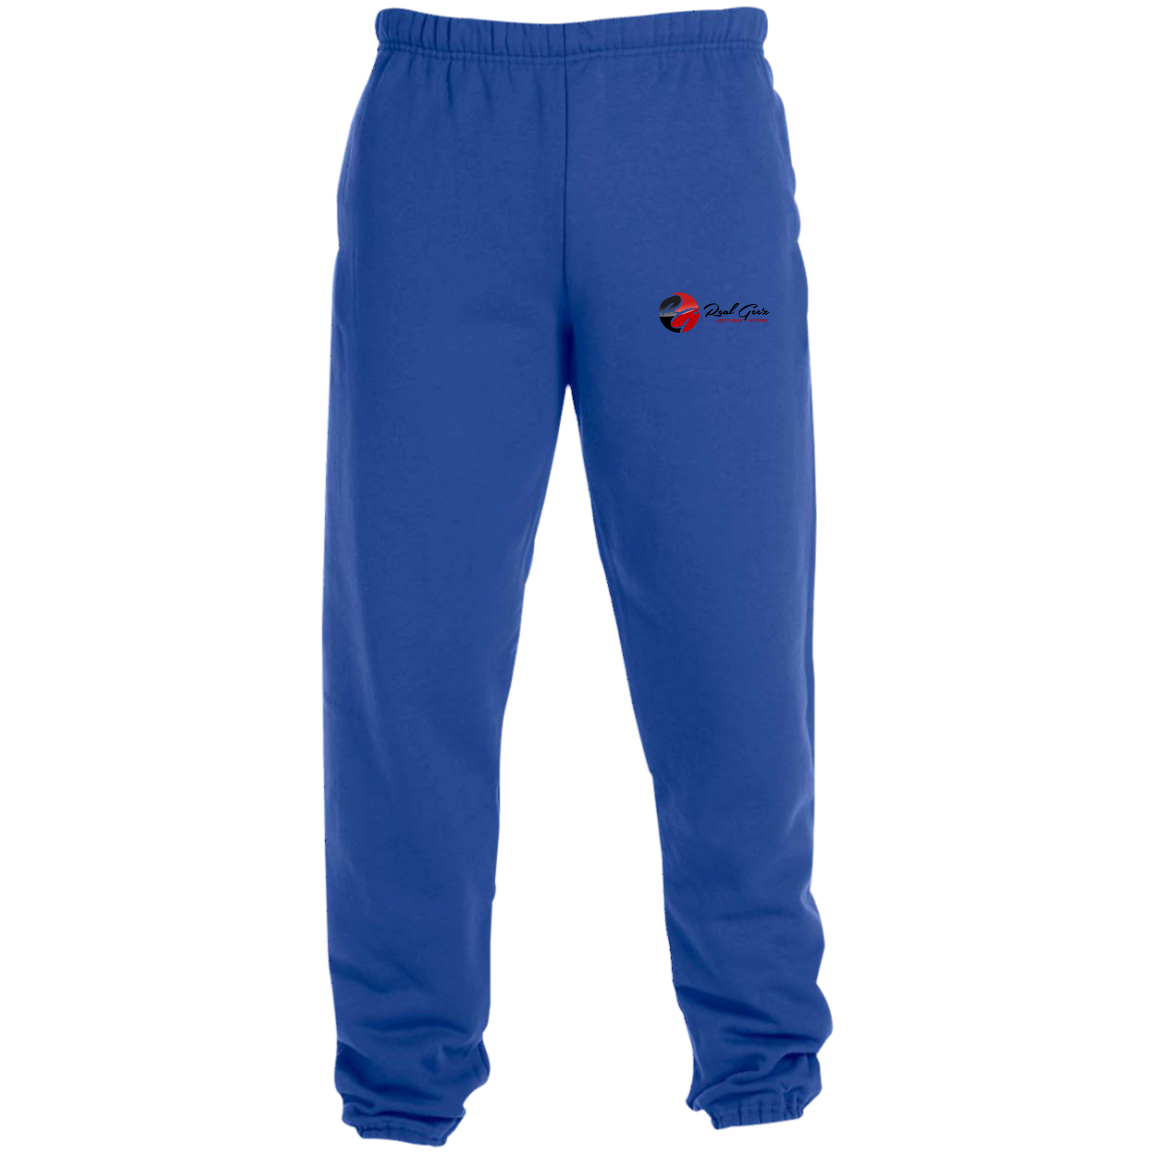 Real Geez  Sweatpants with Pockets